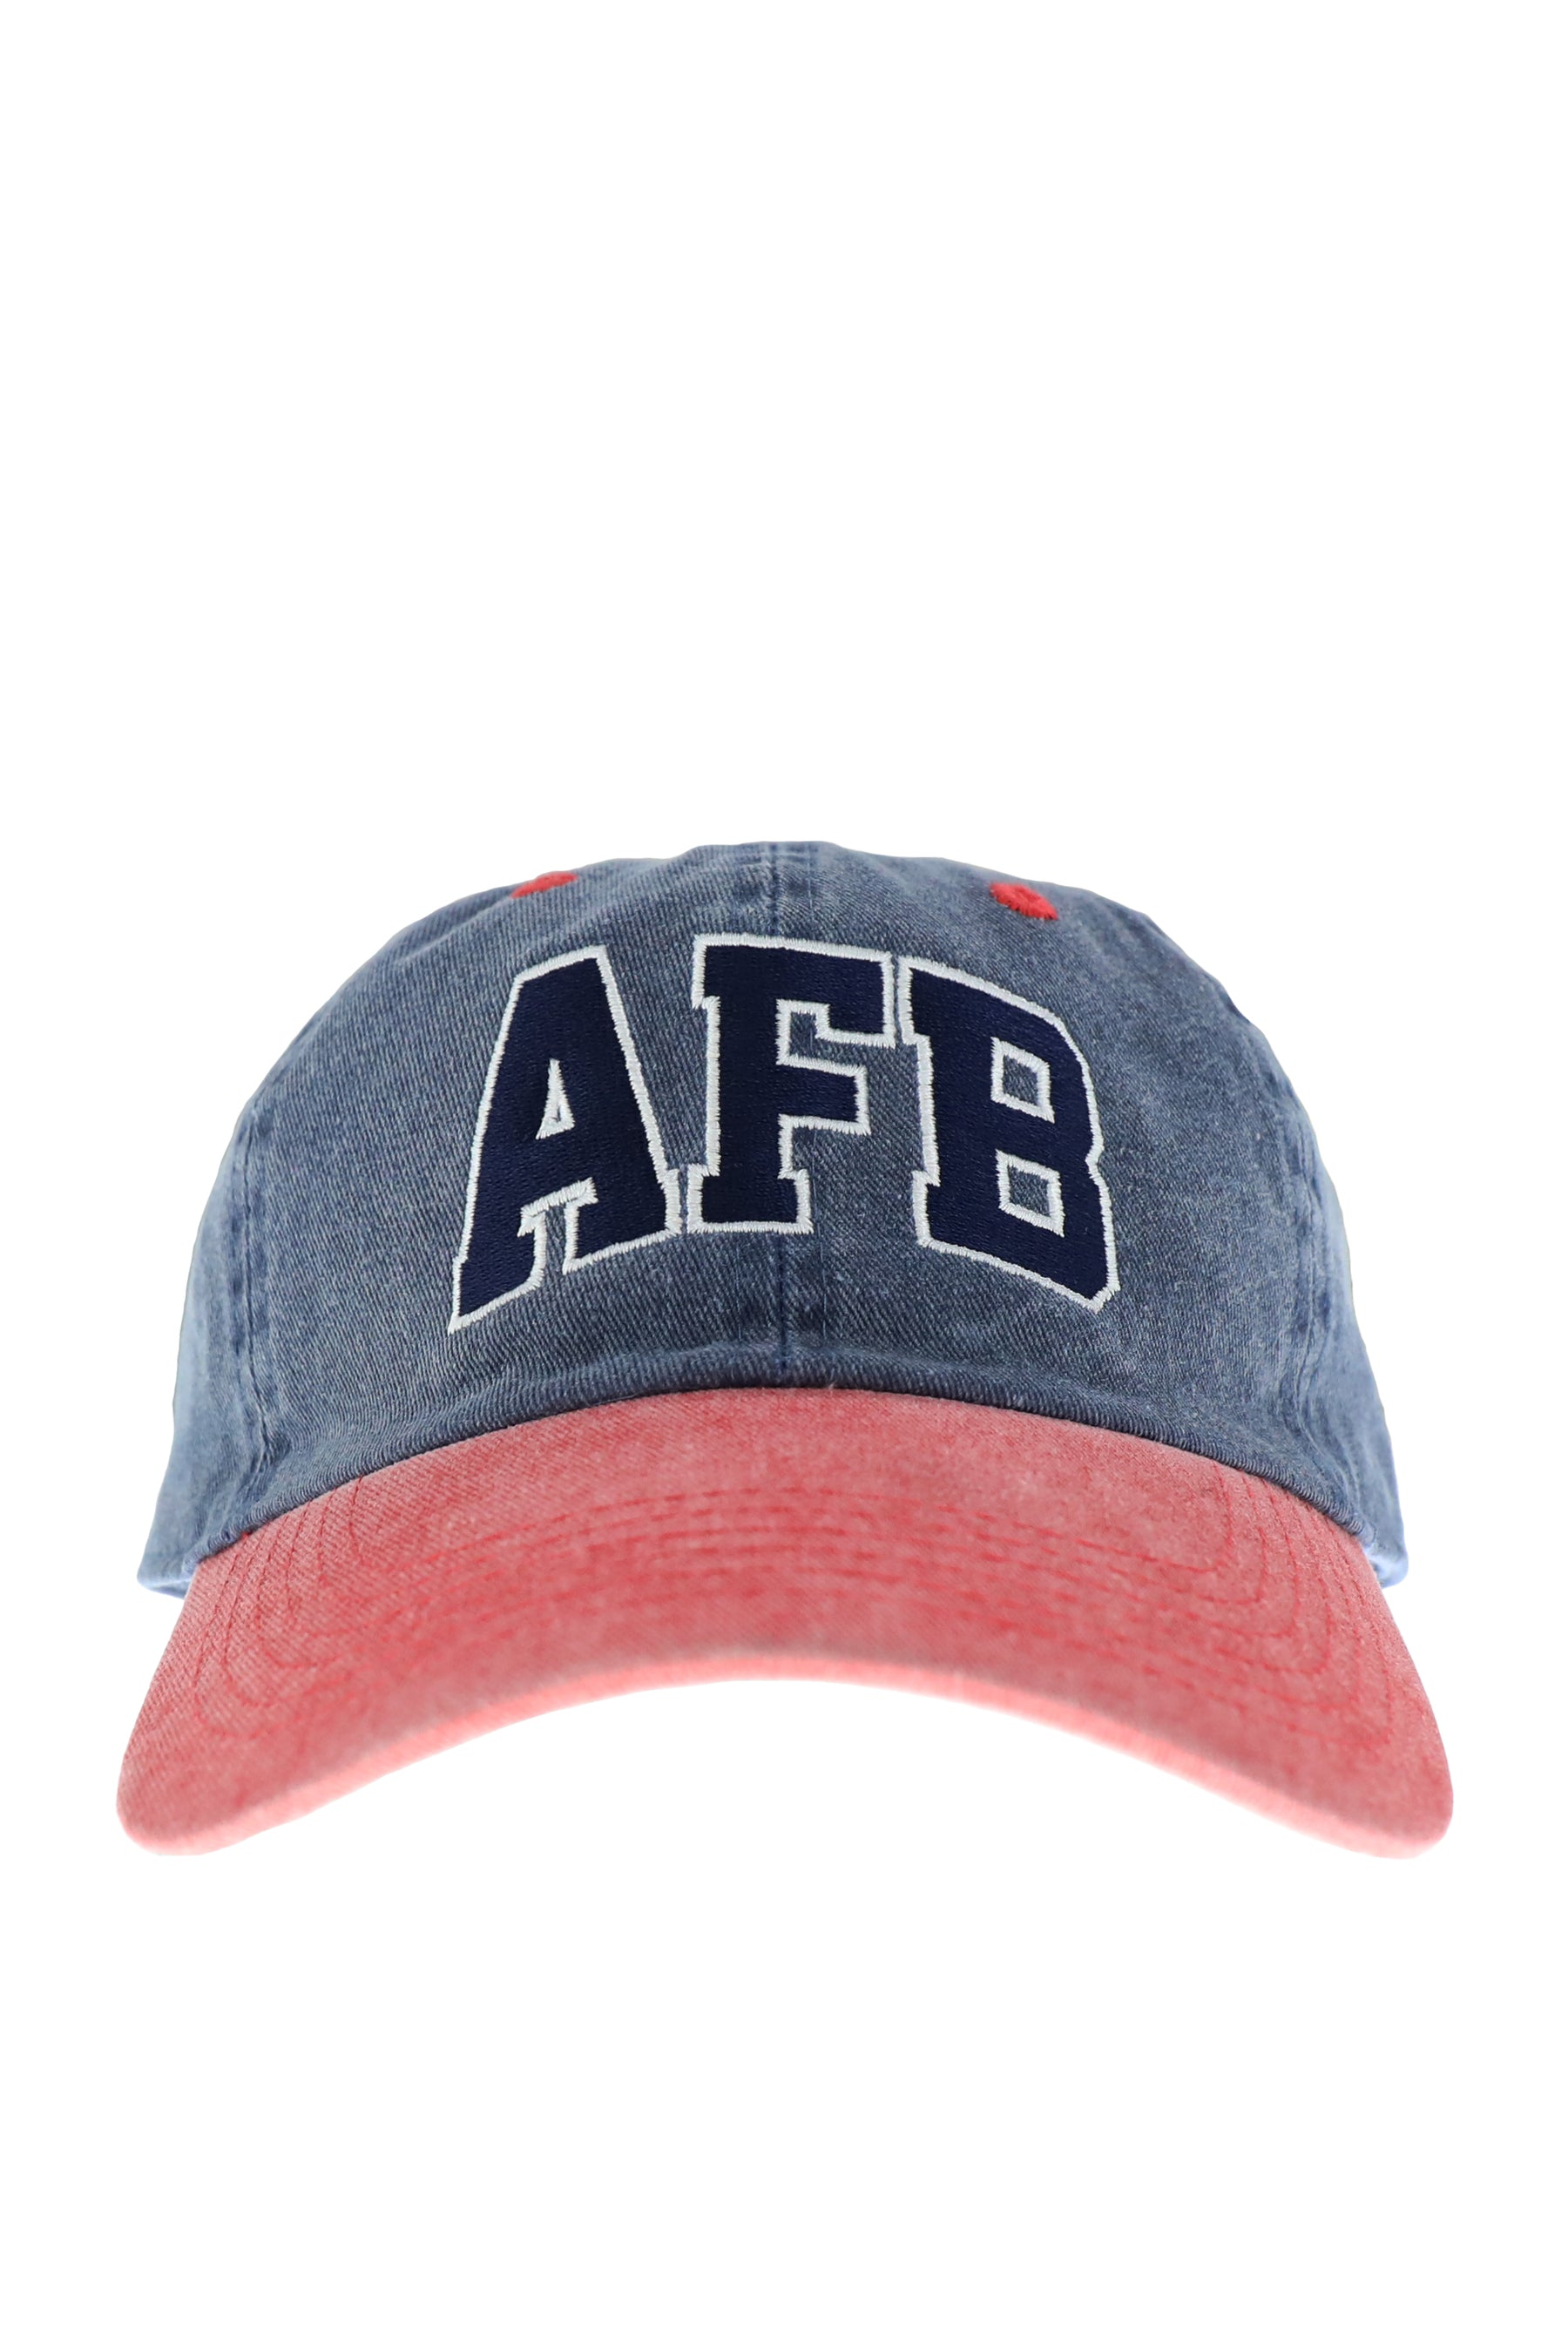 AFB SS23 CLASSIC LOGO CAP / NVY / RED -NUBIAN